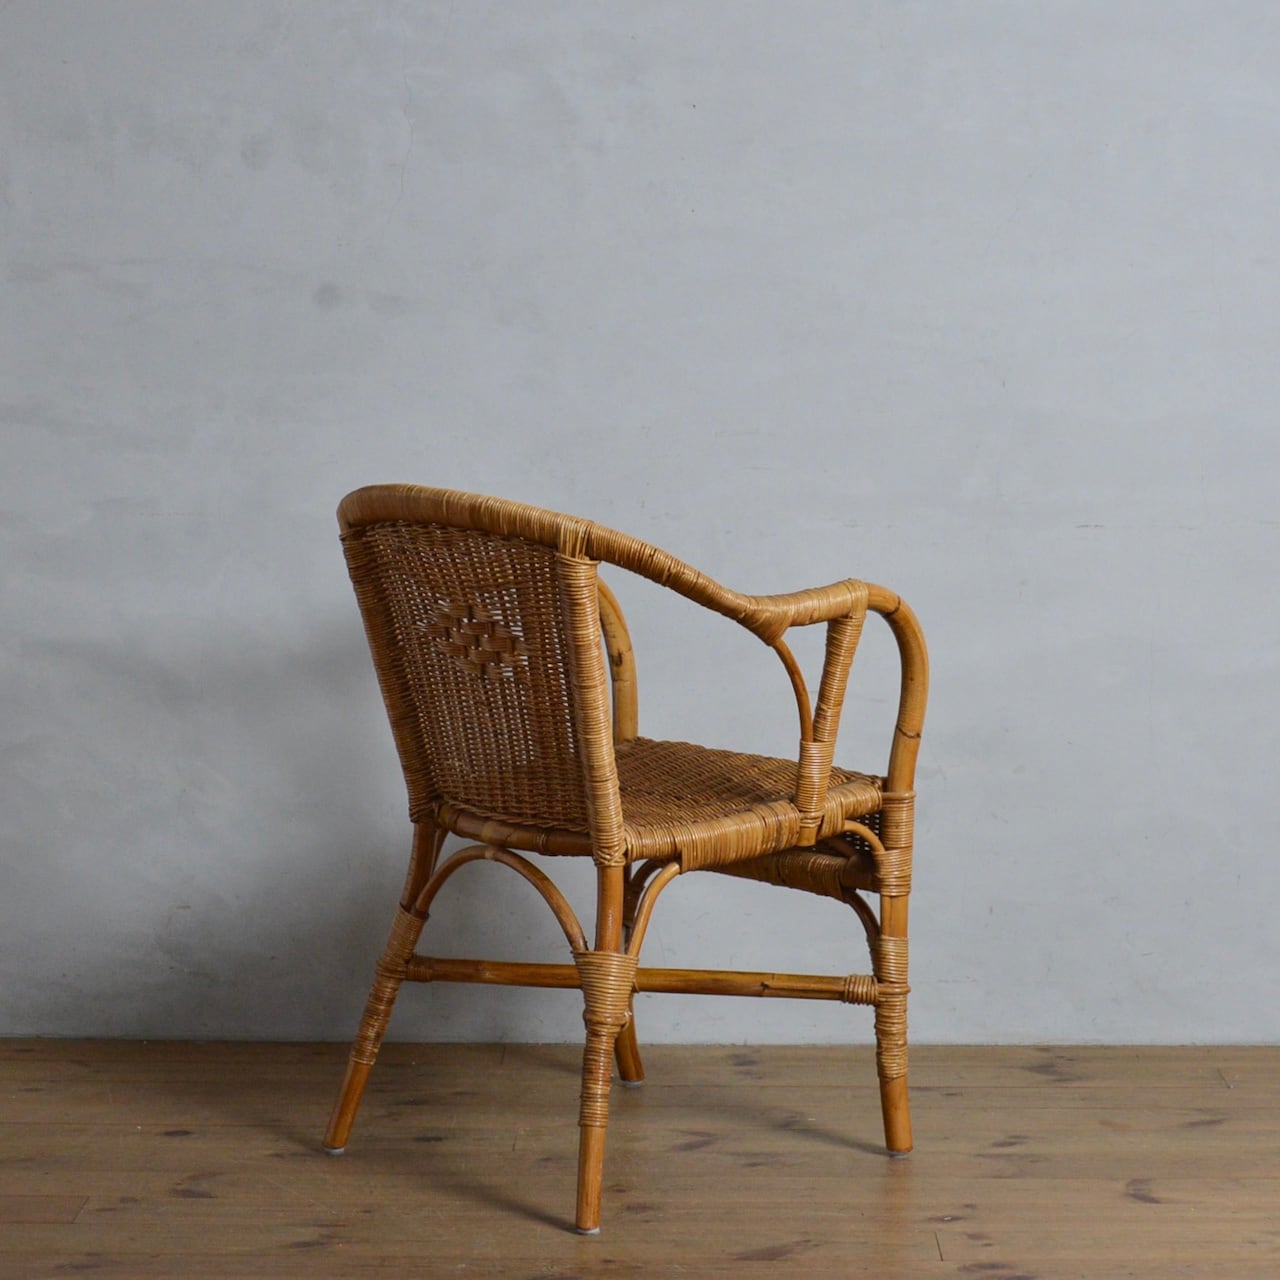 Rattan Chair / ラタン チェア 【A】〈椅子・籐張り・店舗什器〉112200 | SHABBY'S MARKETPLACE　 アンティーク・ヴィンテージ 家具や雑貨のお店 powered by BASE